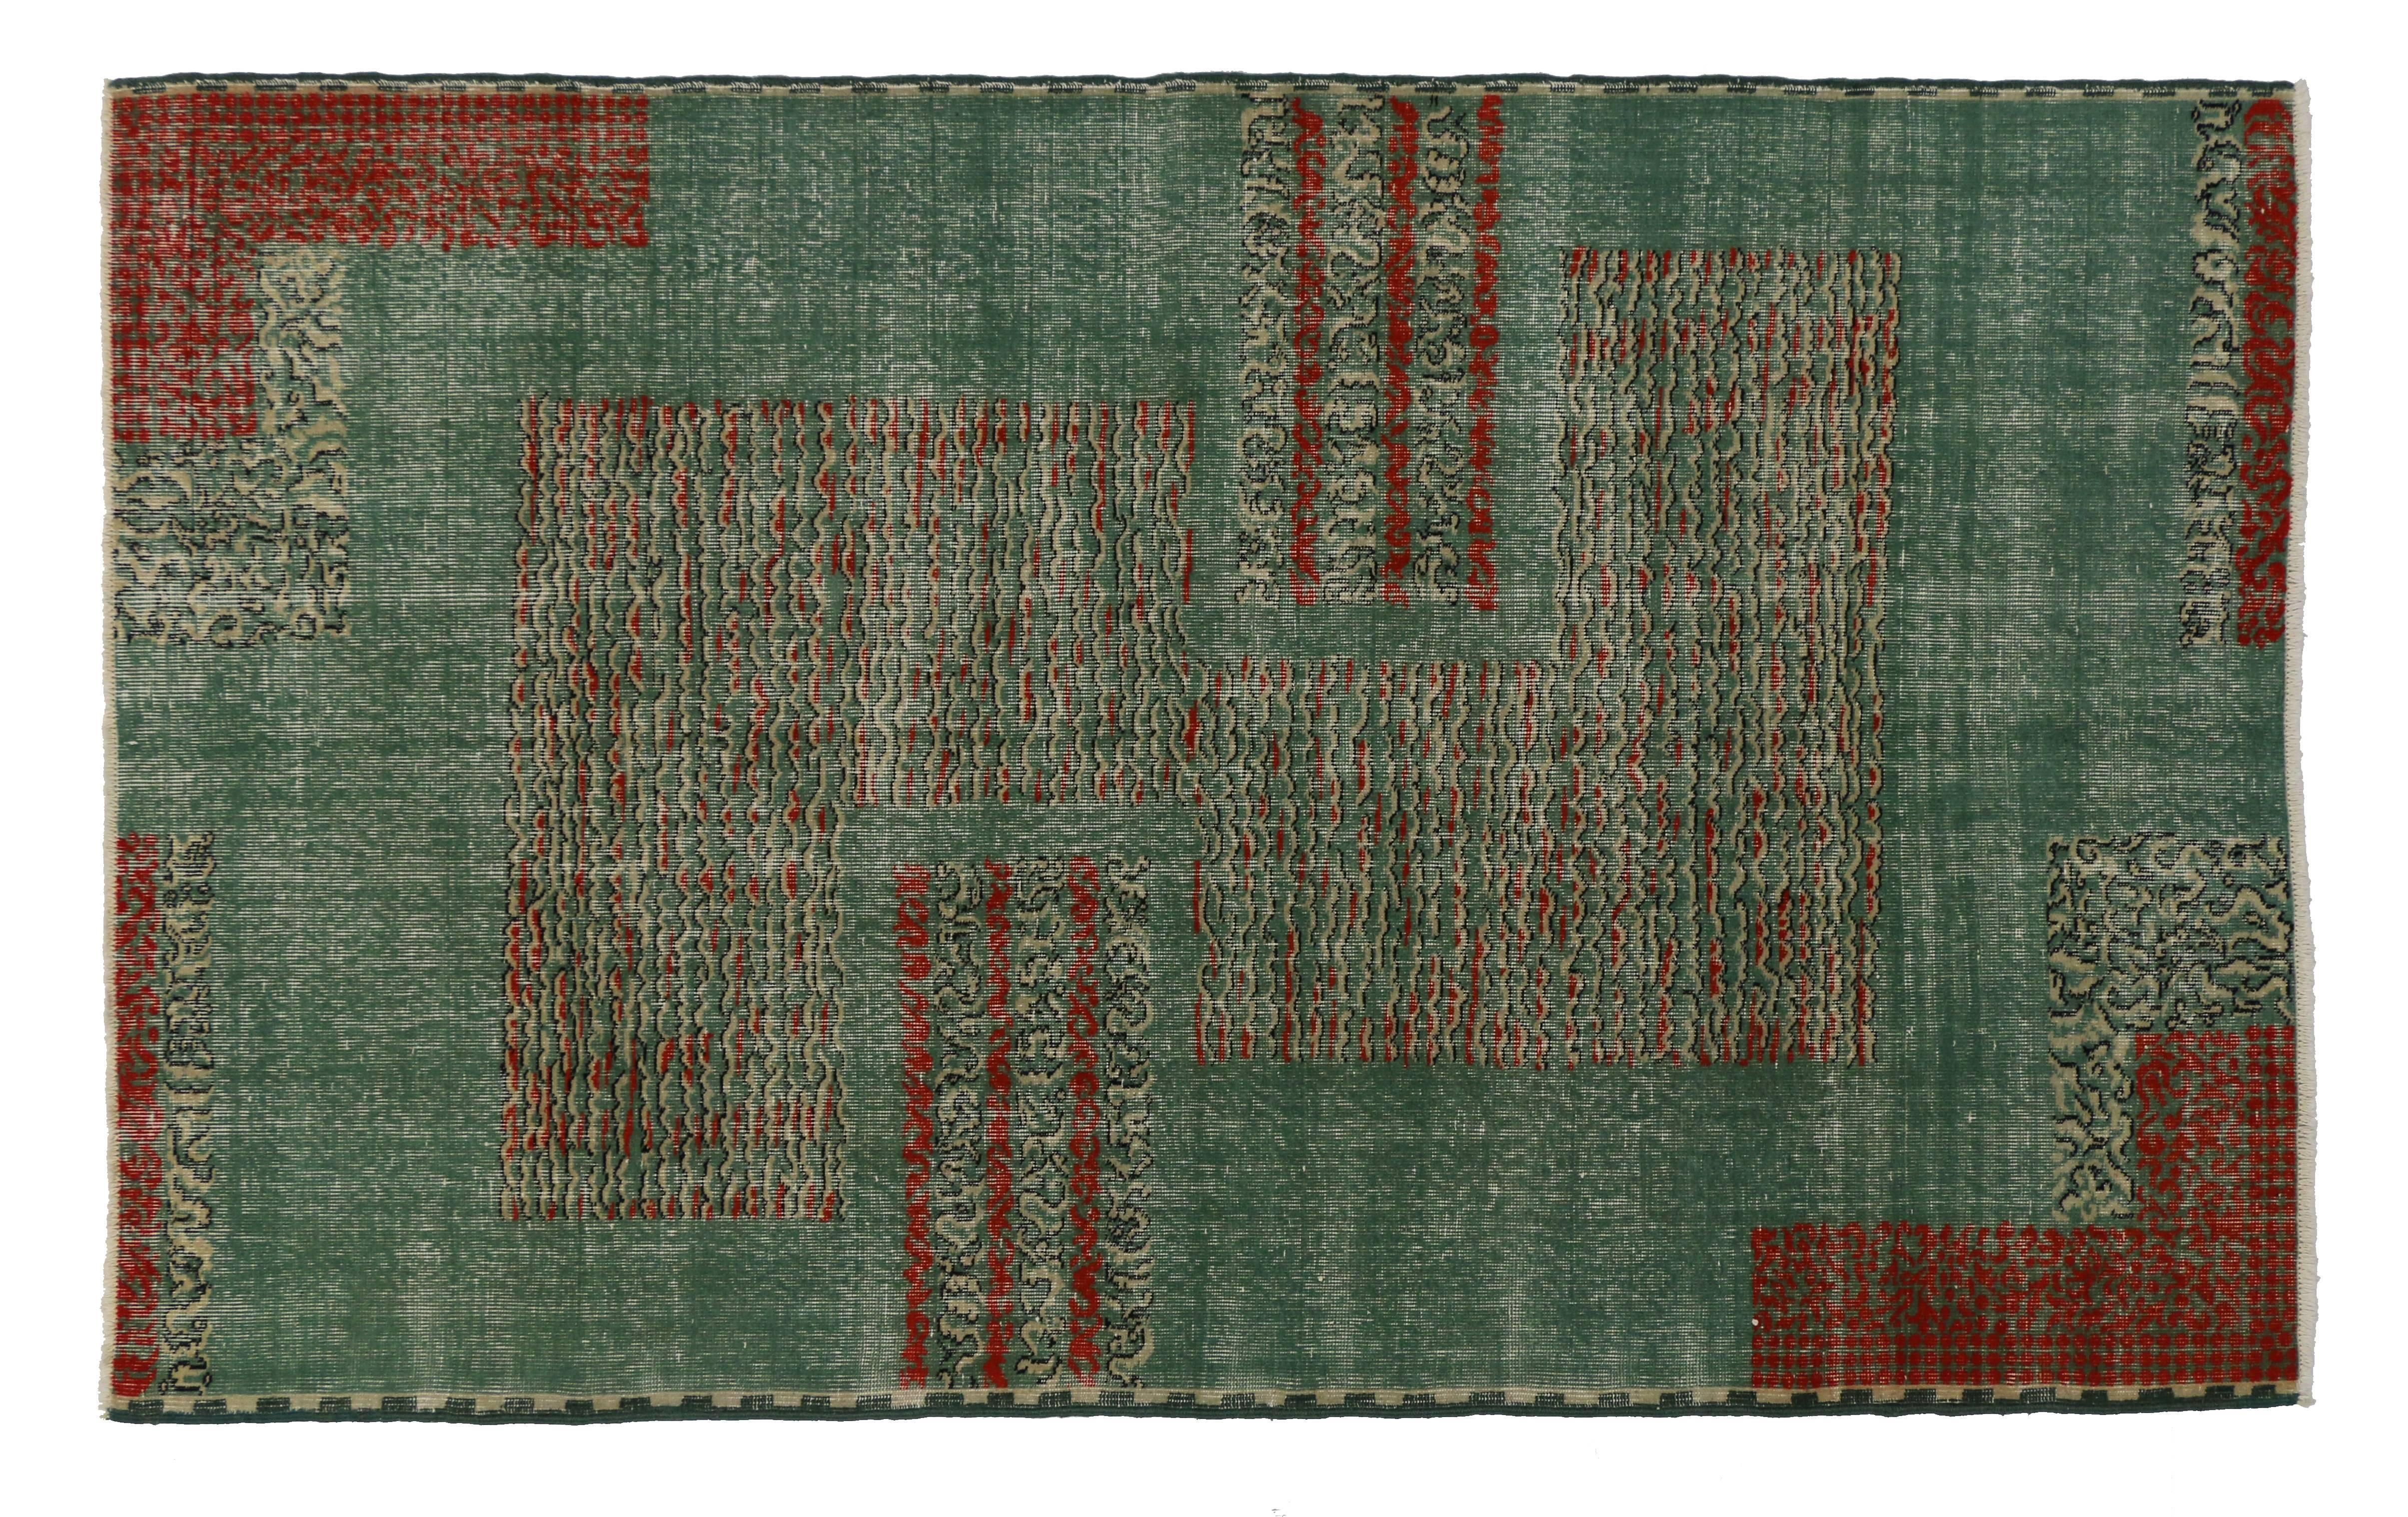 Hand-Knotted Distressed Vintage Turkish Sivas Rug with Postmodern Industrial Bauhaus Style